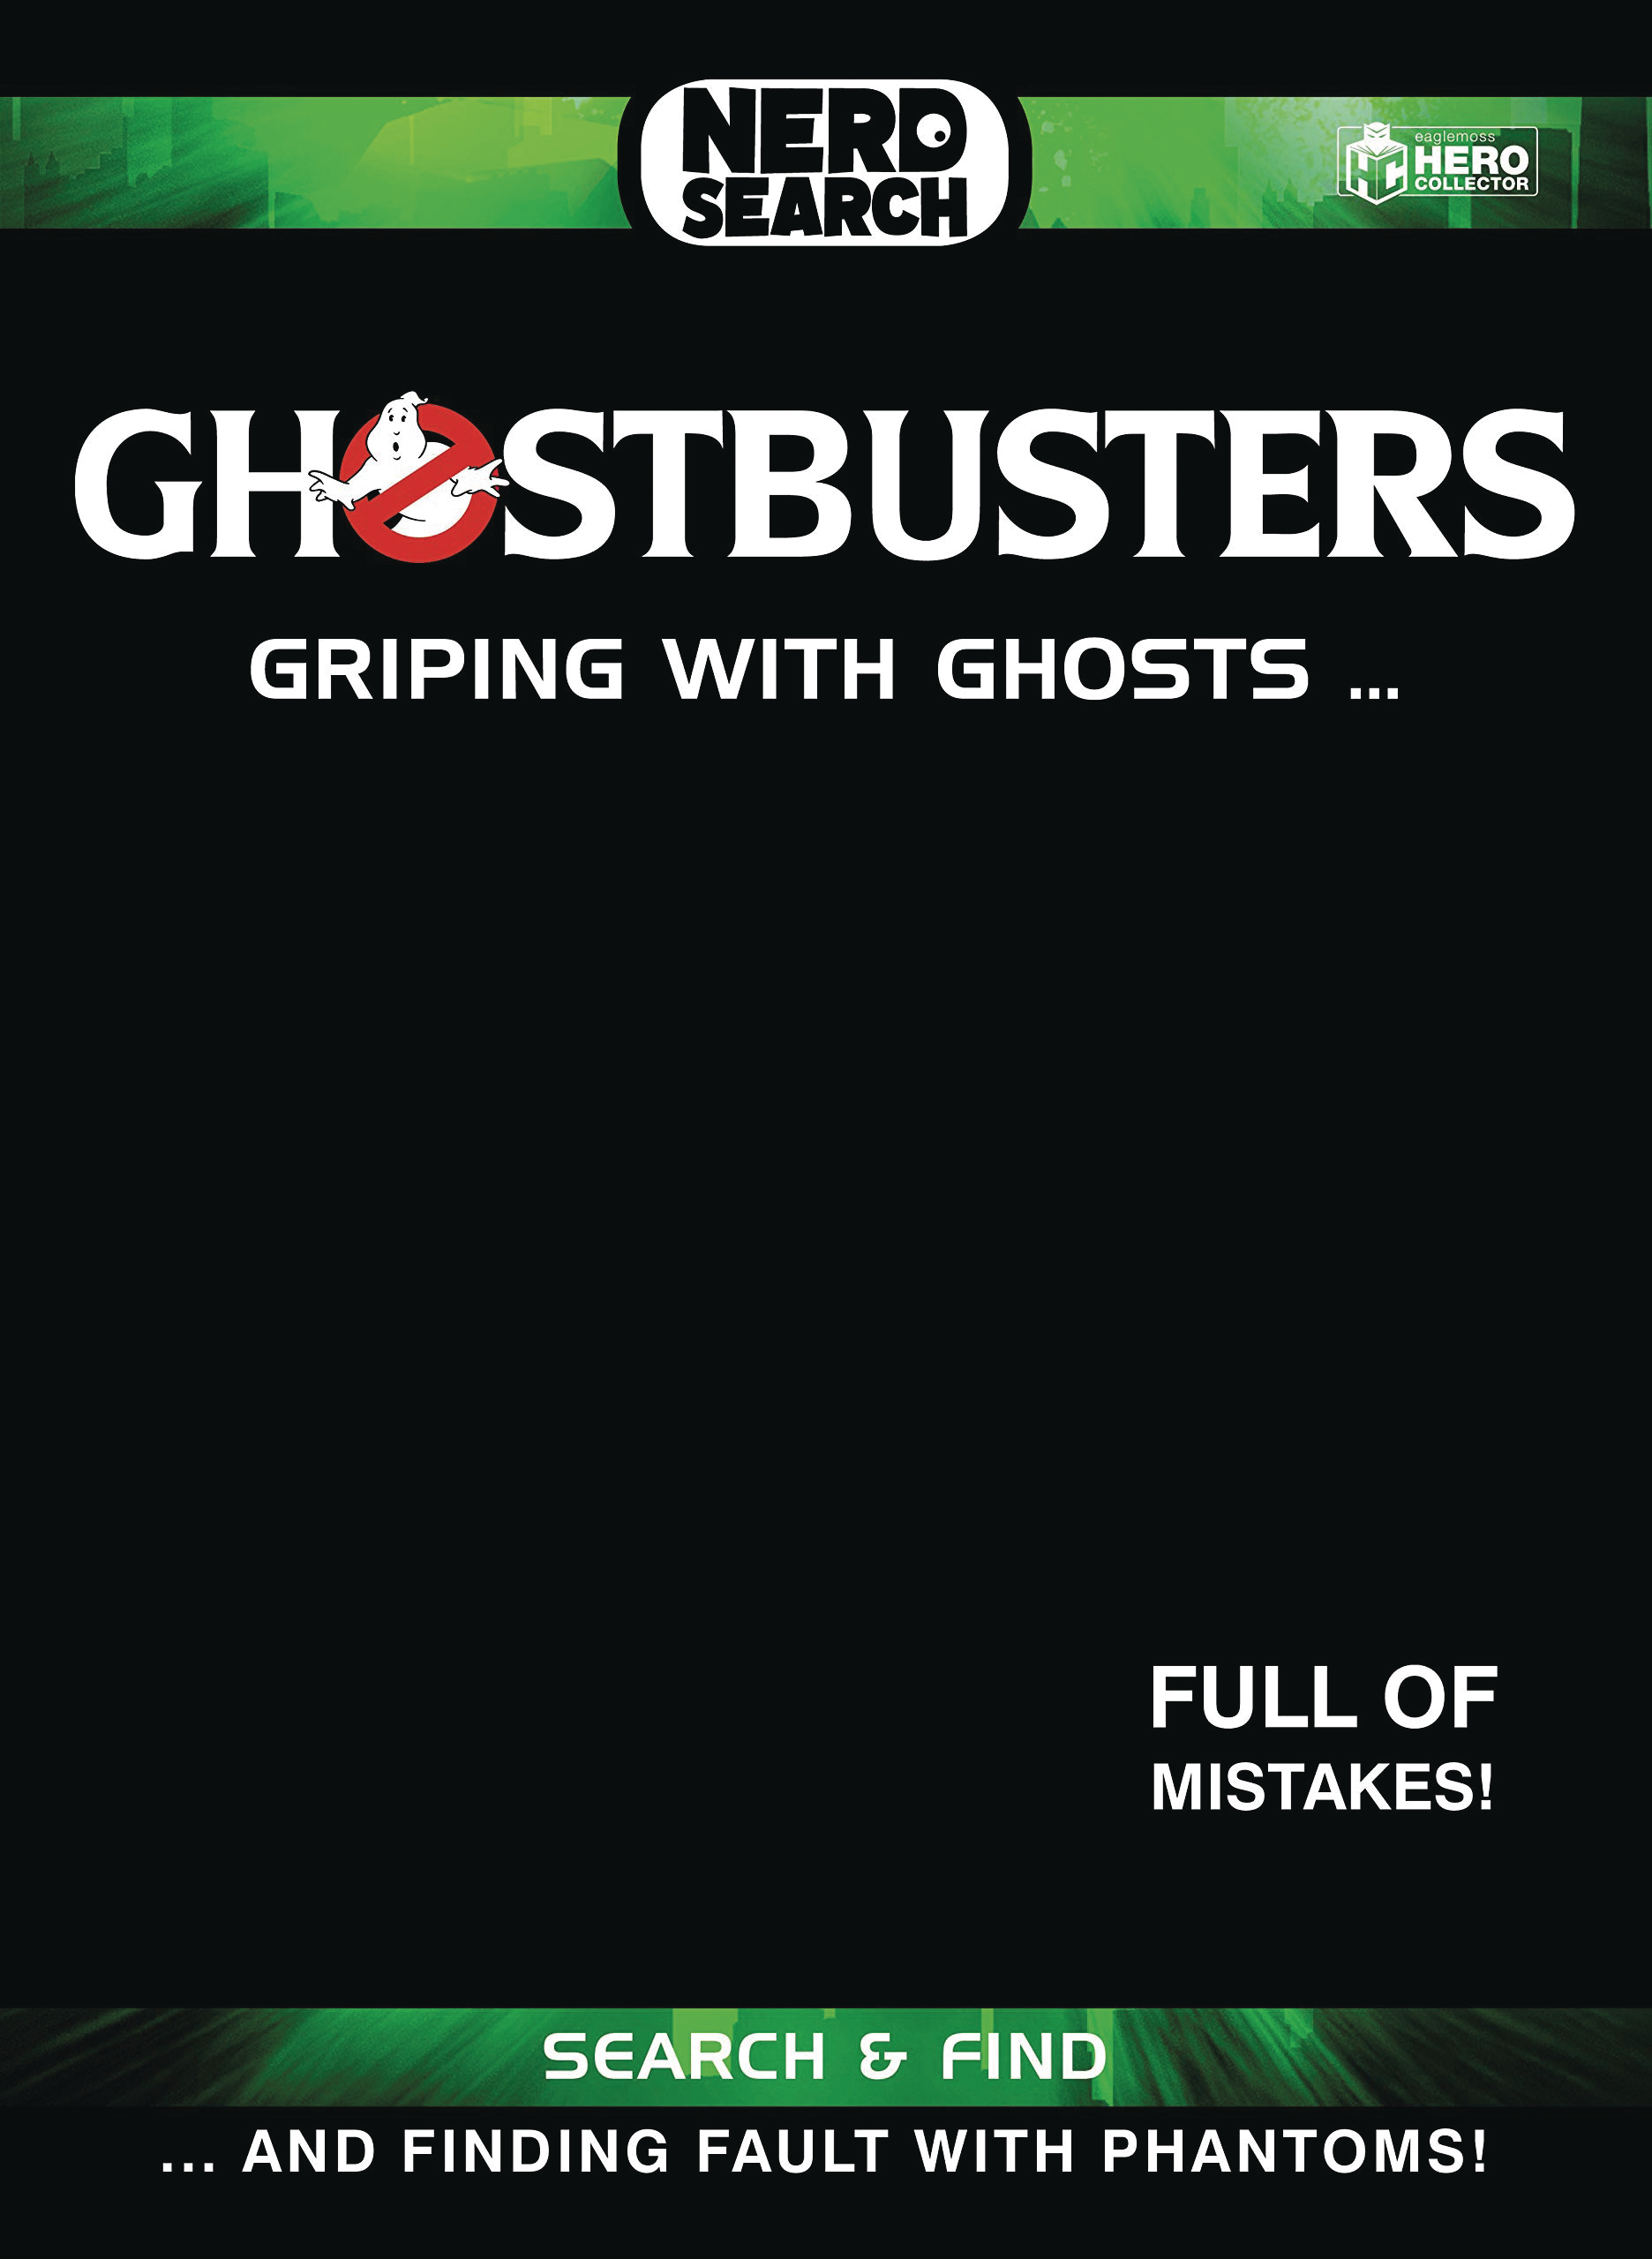 Ghostbusters Nerd Search Hardcover Griping With Ghosts